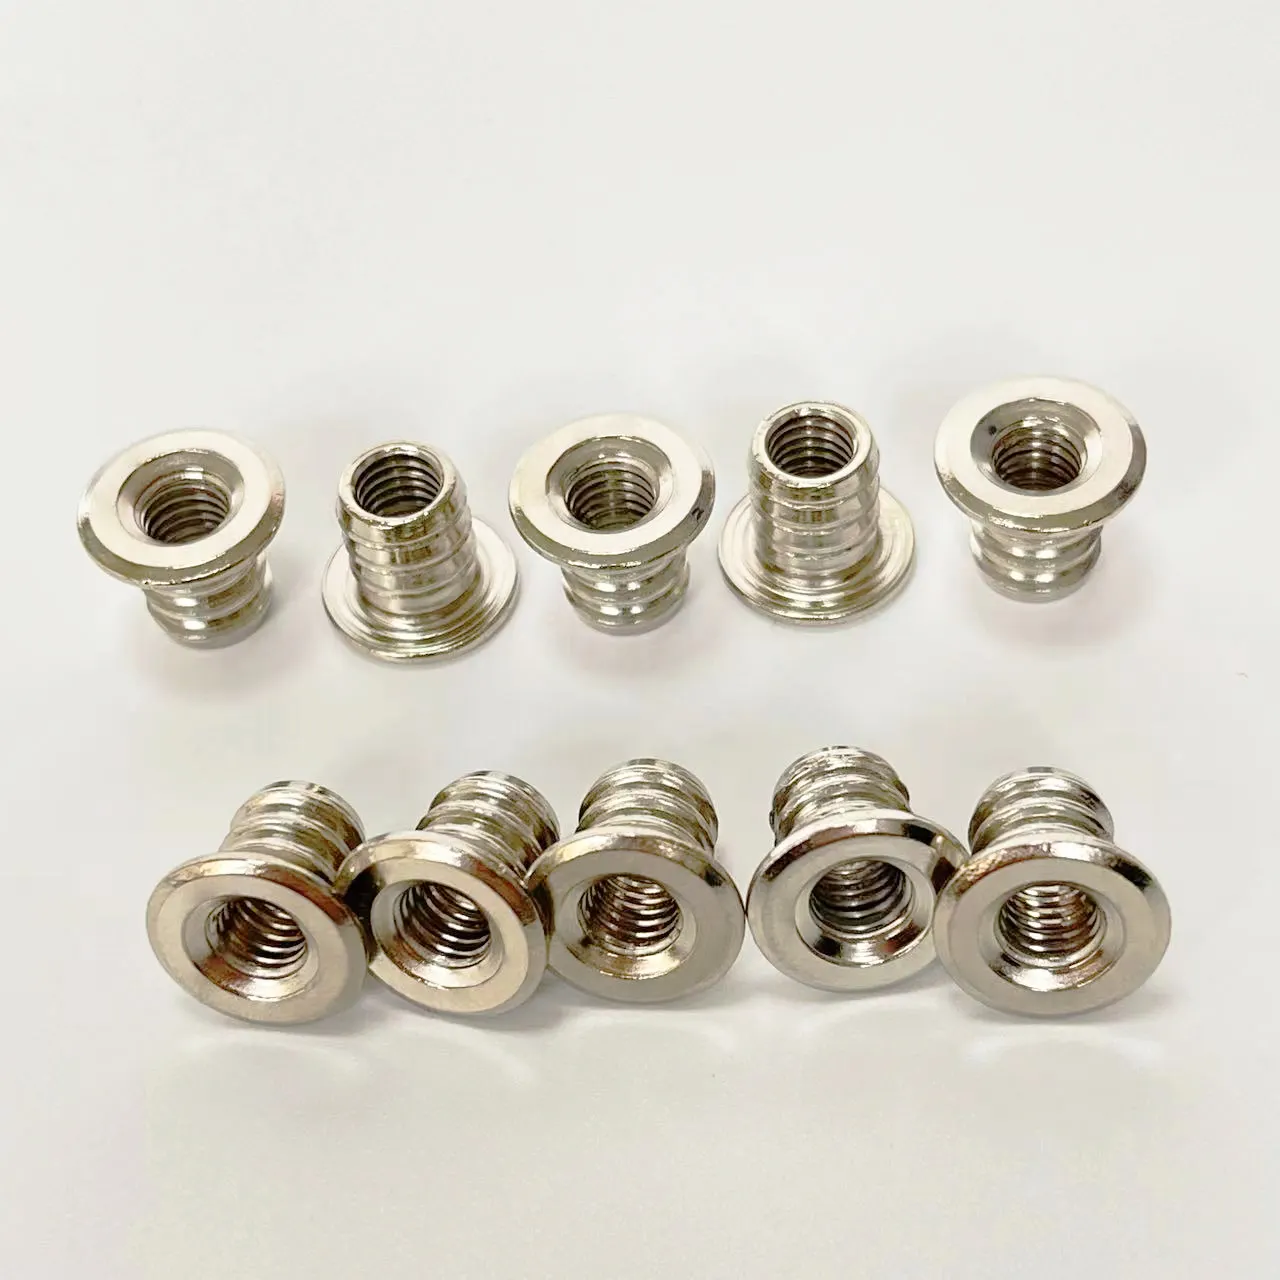 Guangdong factory Furniture Fasteners nut carbon steel Nickel plated M6 Furniture Insert T-nuts